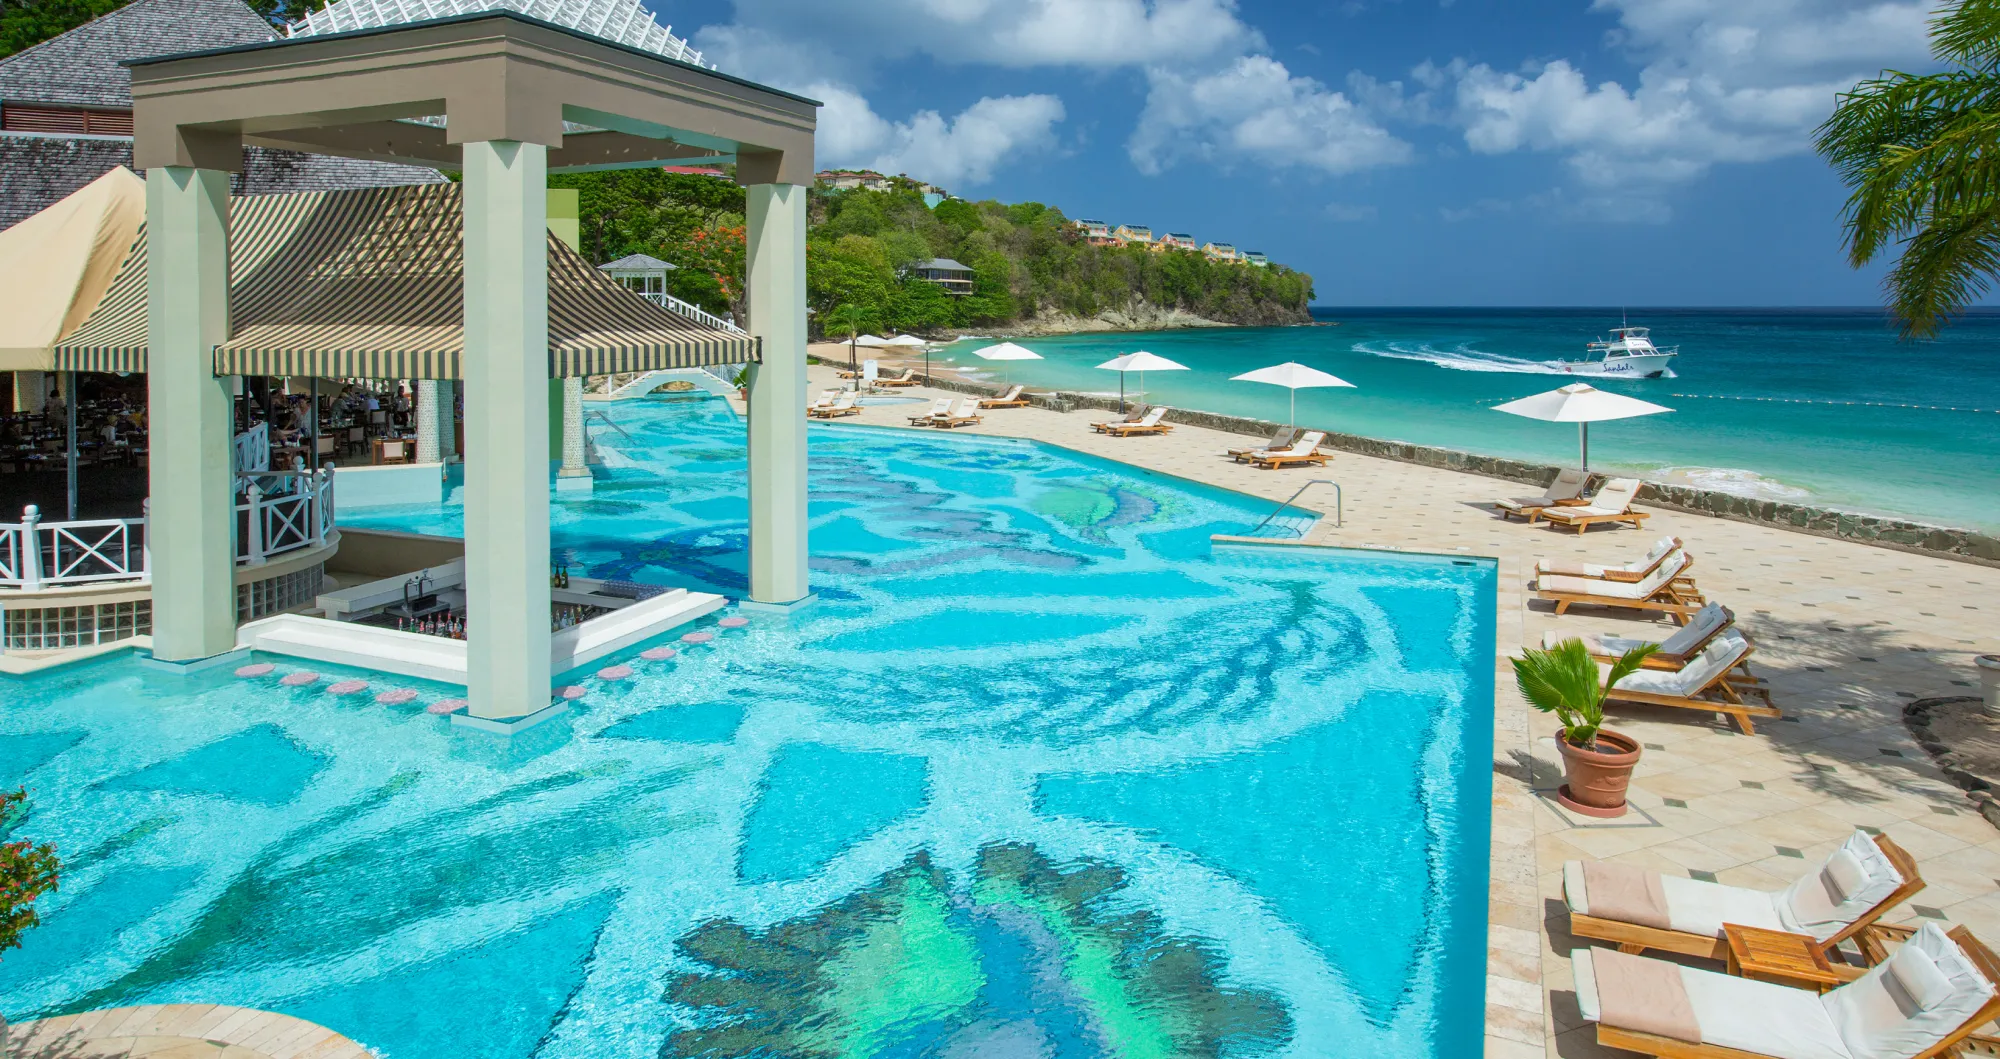 Which Sandals Resorts in Saint Lucia is right for me?